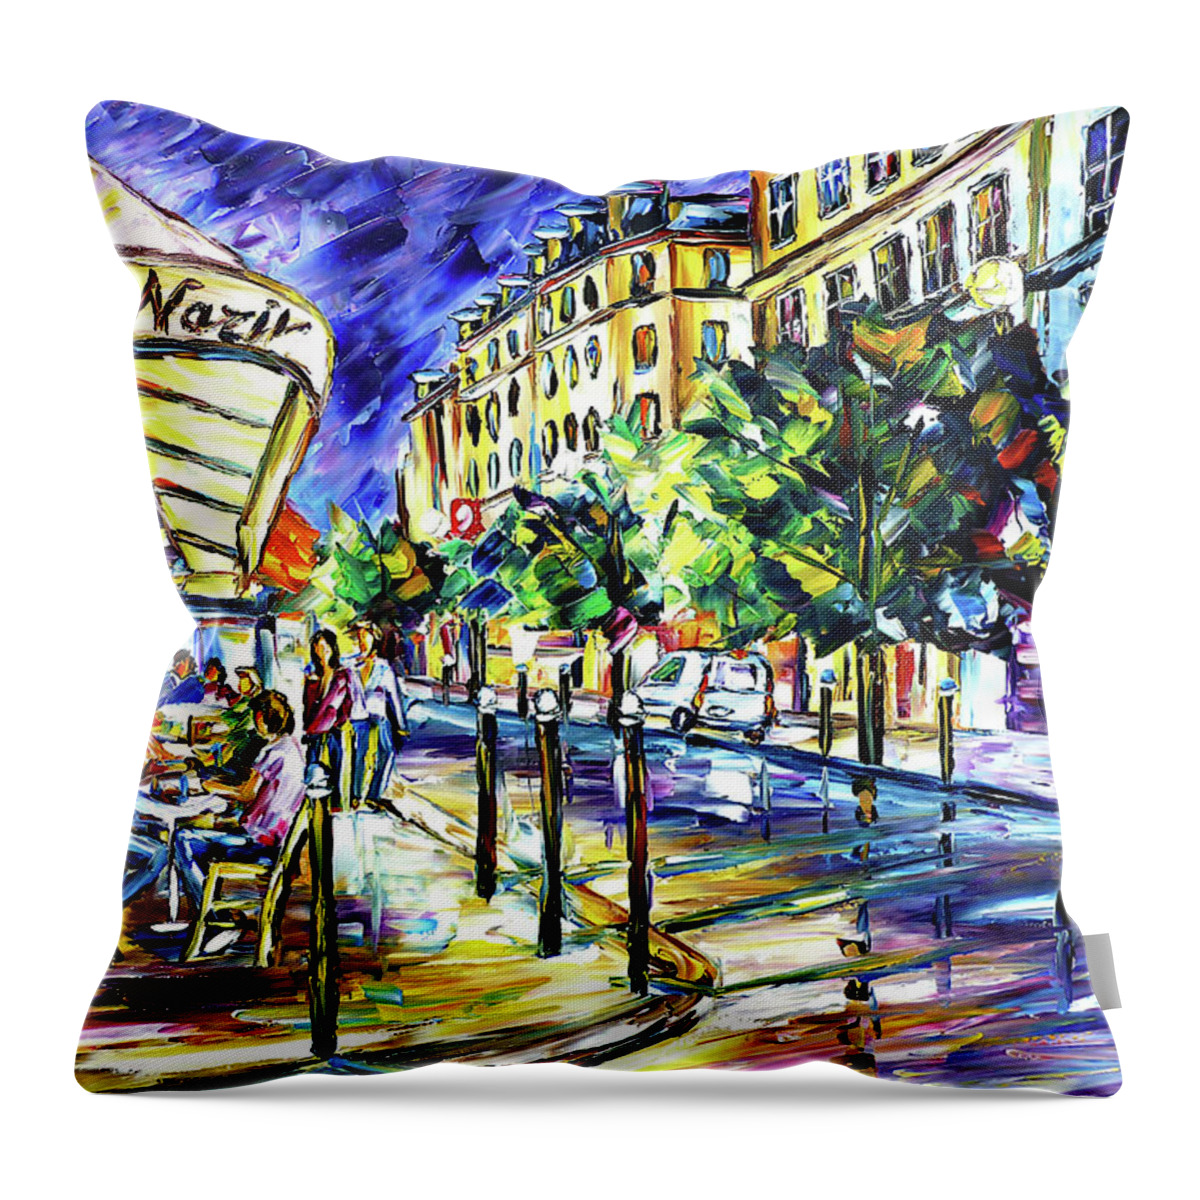 Cafe Le Nazir Paris Throw Pillow featuring the painting At Night On Montmartre by Mirek Kuzniar